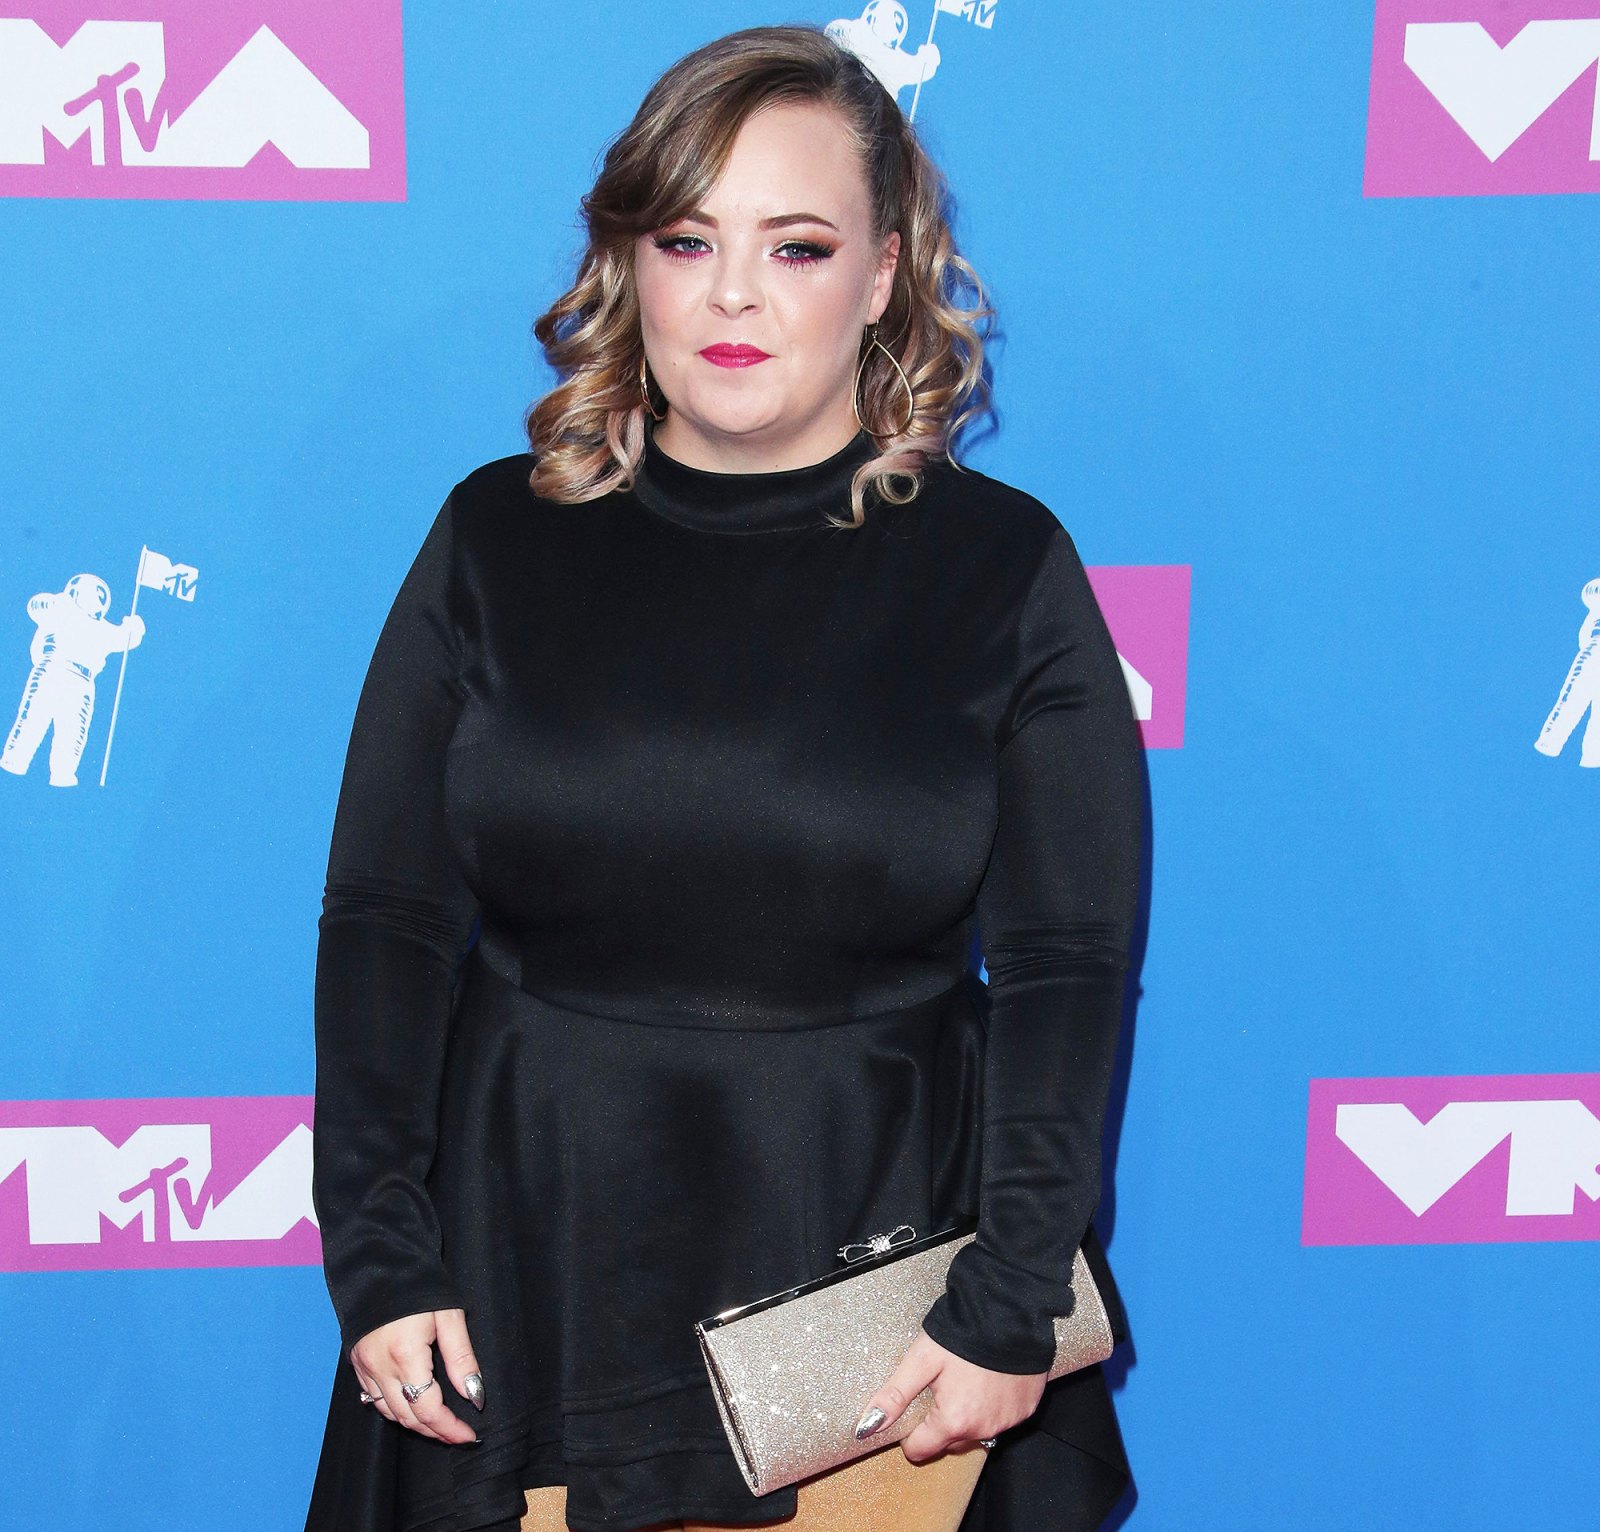 Catelynn Lowell Reveals She Suffered a Pregnancy Loss